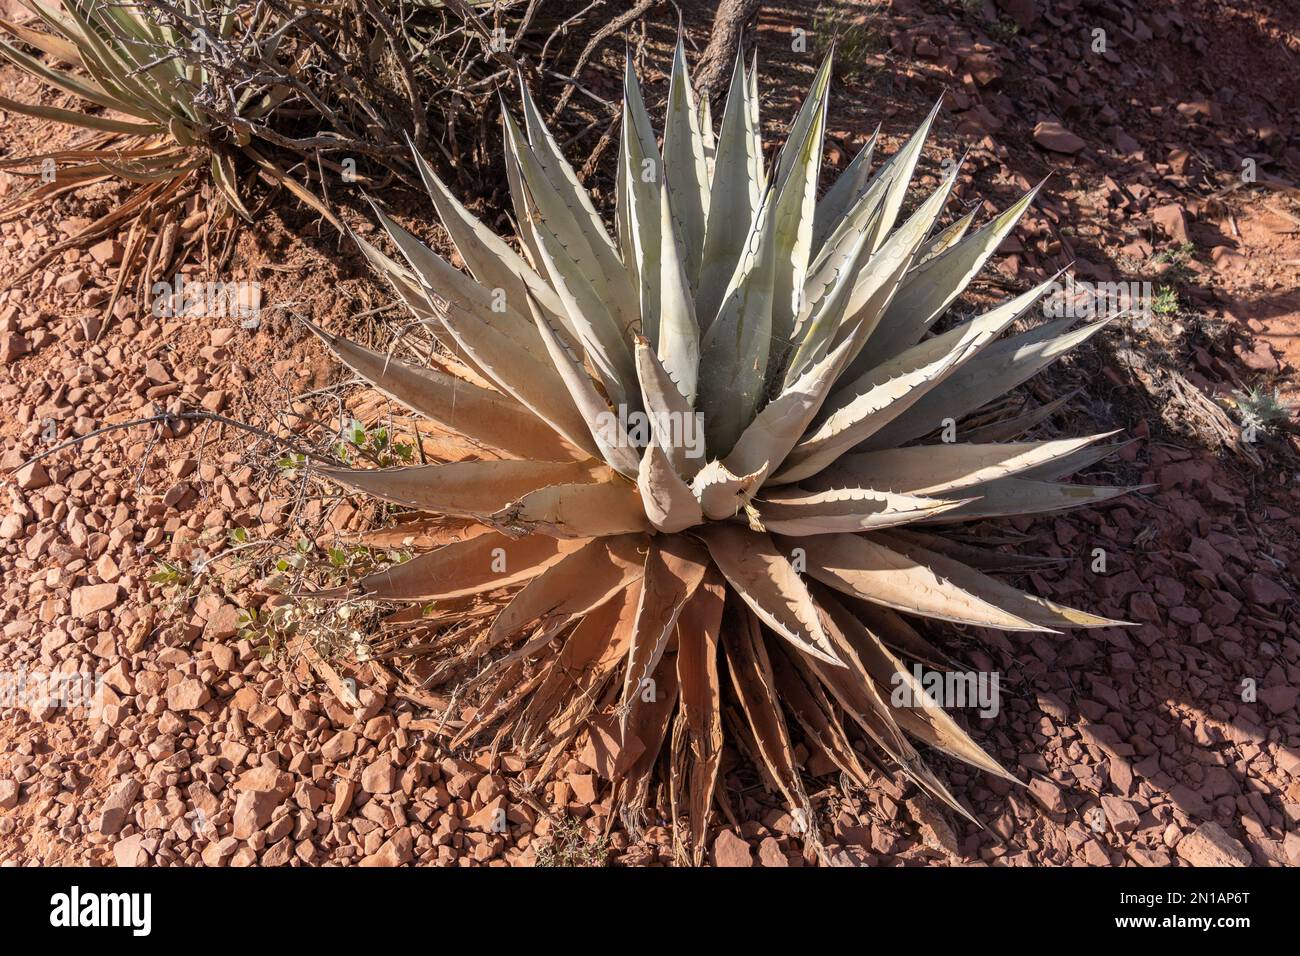 A top view of a golden-flowered century plant growing in the desert. Stock Photo